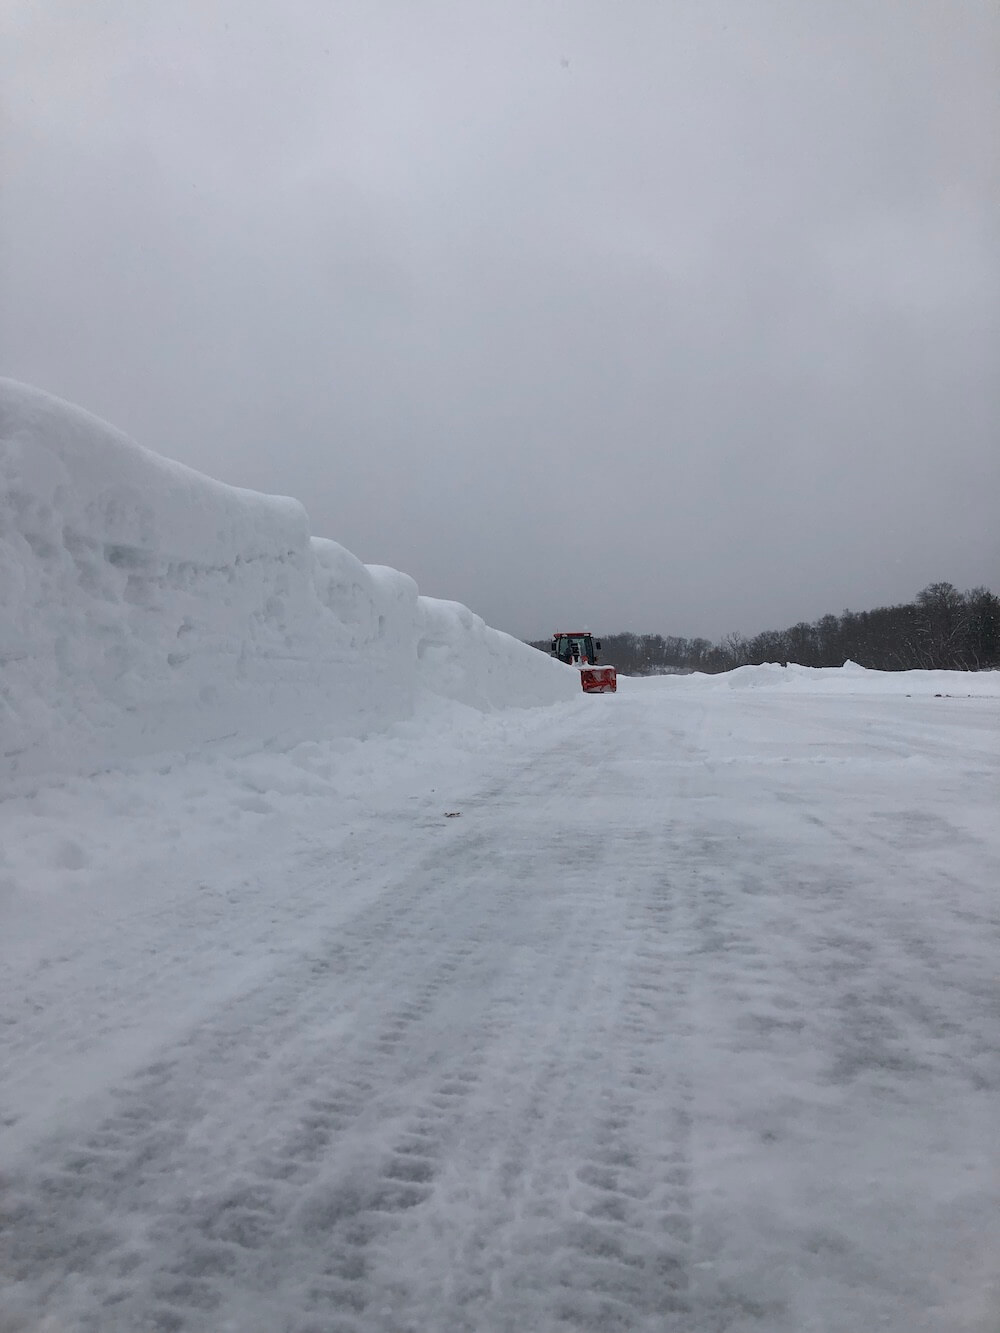 Snow blower clearing off the race track for the Twin Bridge Takedown in northern Wisconsin